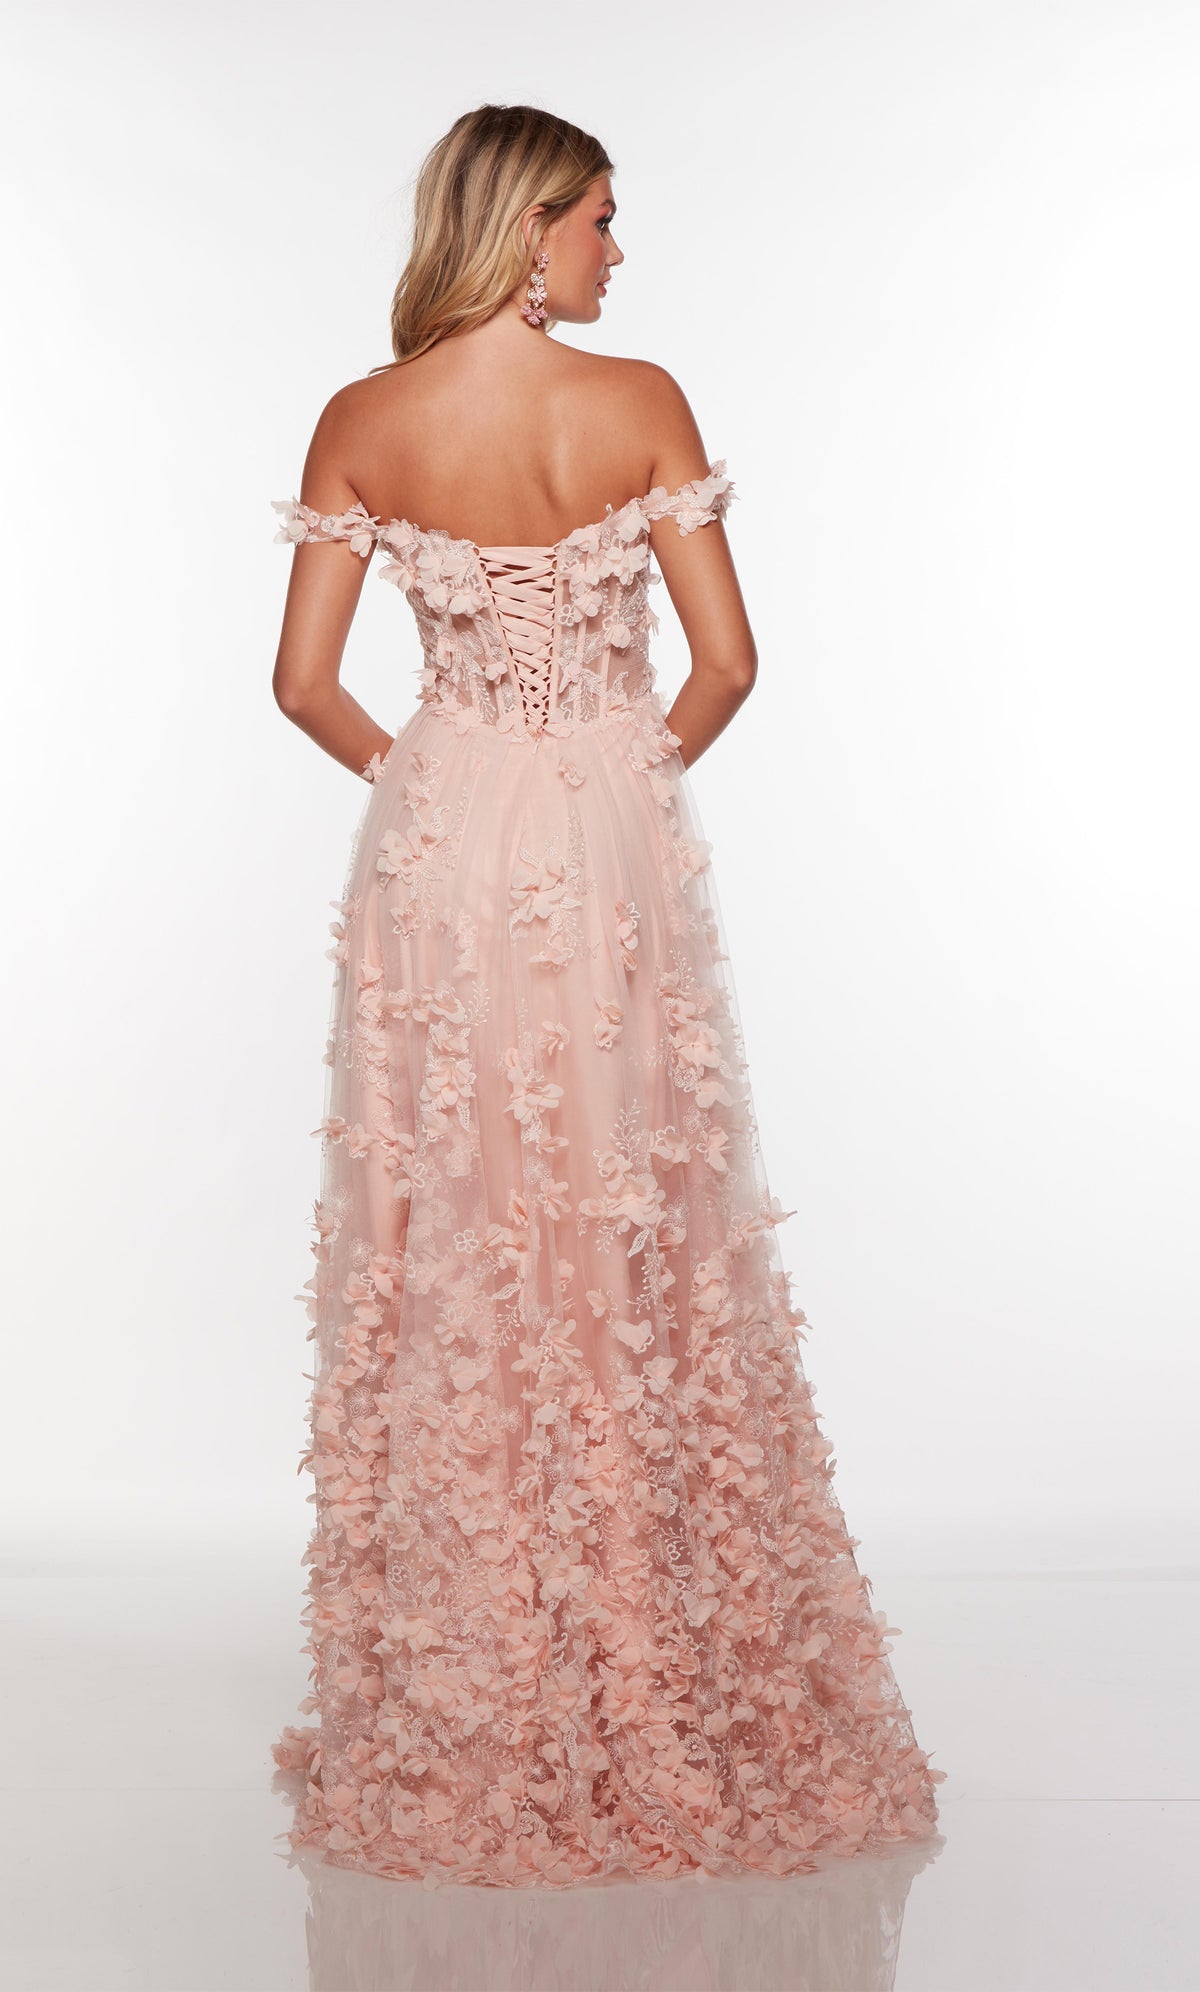 Light pink off the shoulder corset dress with a sheer bodice and delicate 3d flowers throughout.